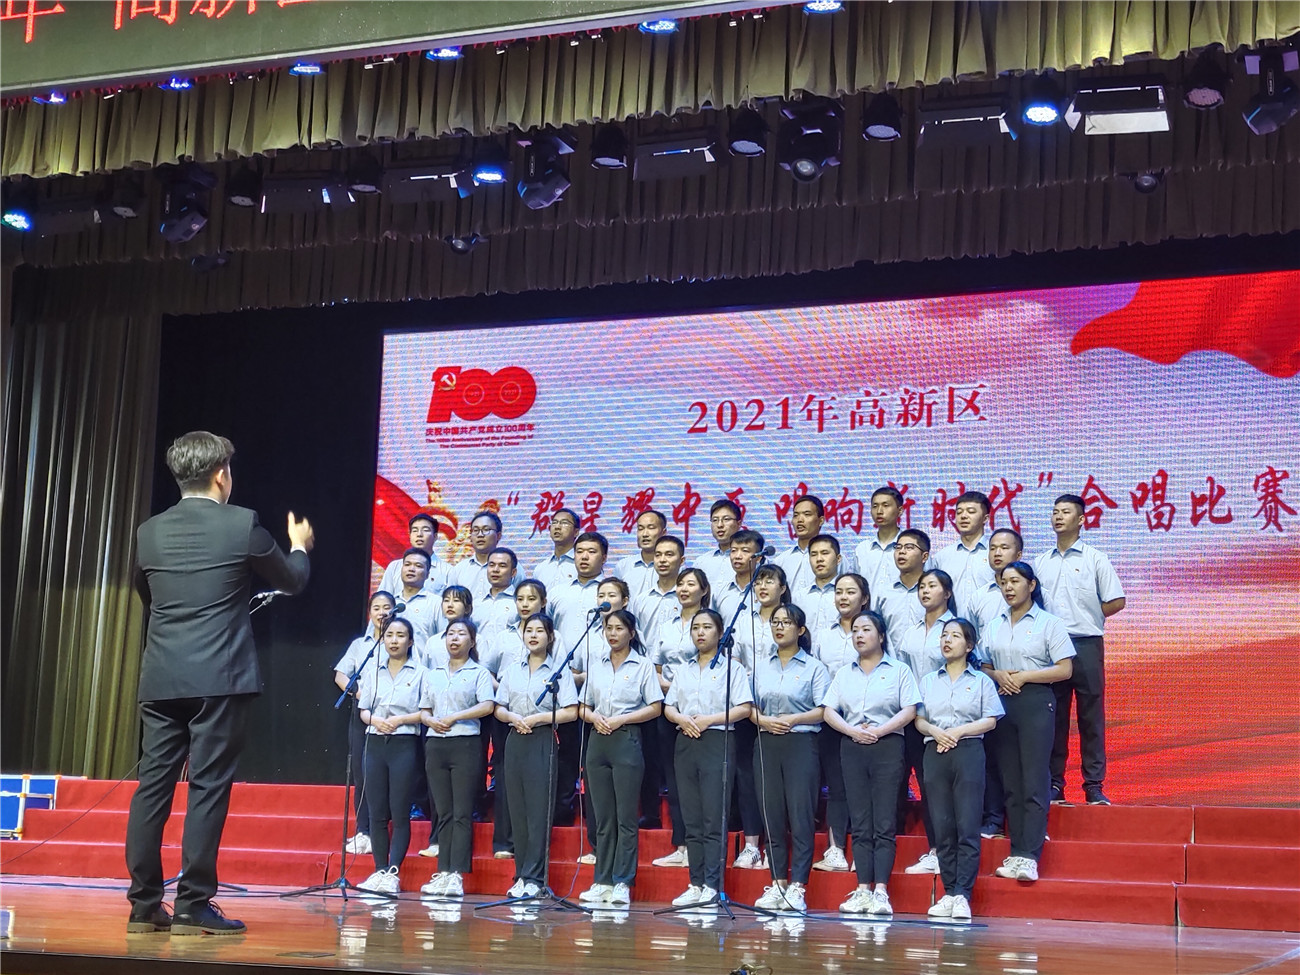 Luoyang Jinlu Cemented Carbide Tools Co., Ltd. participated in the “Stars Illuminate Central Plains Singing a New Era” in the High-tech Zone of the High-tech Zone-a mass chorus competition celebrating the 100th anniversary of the founding of the Communist Party of China